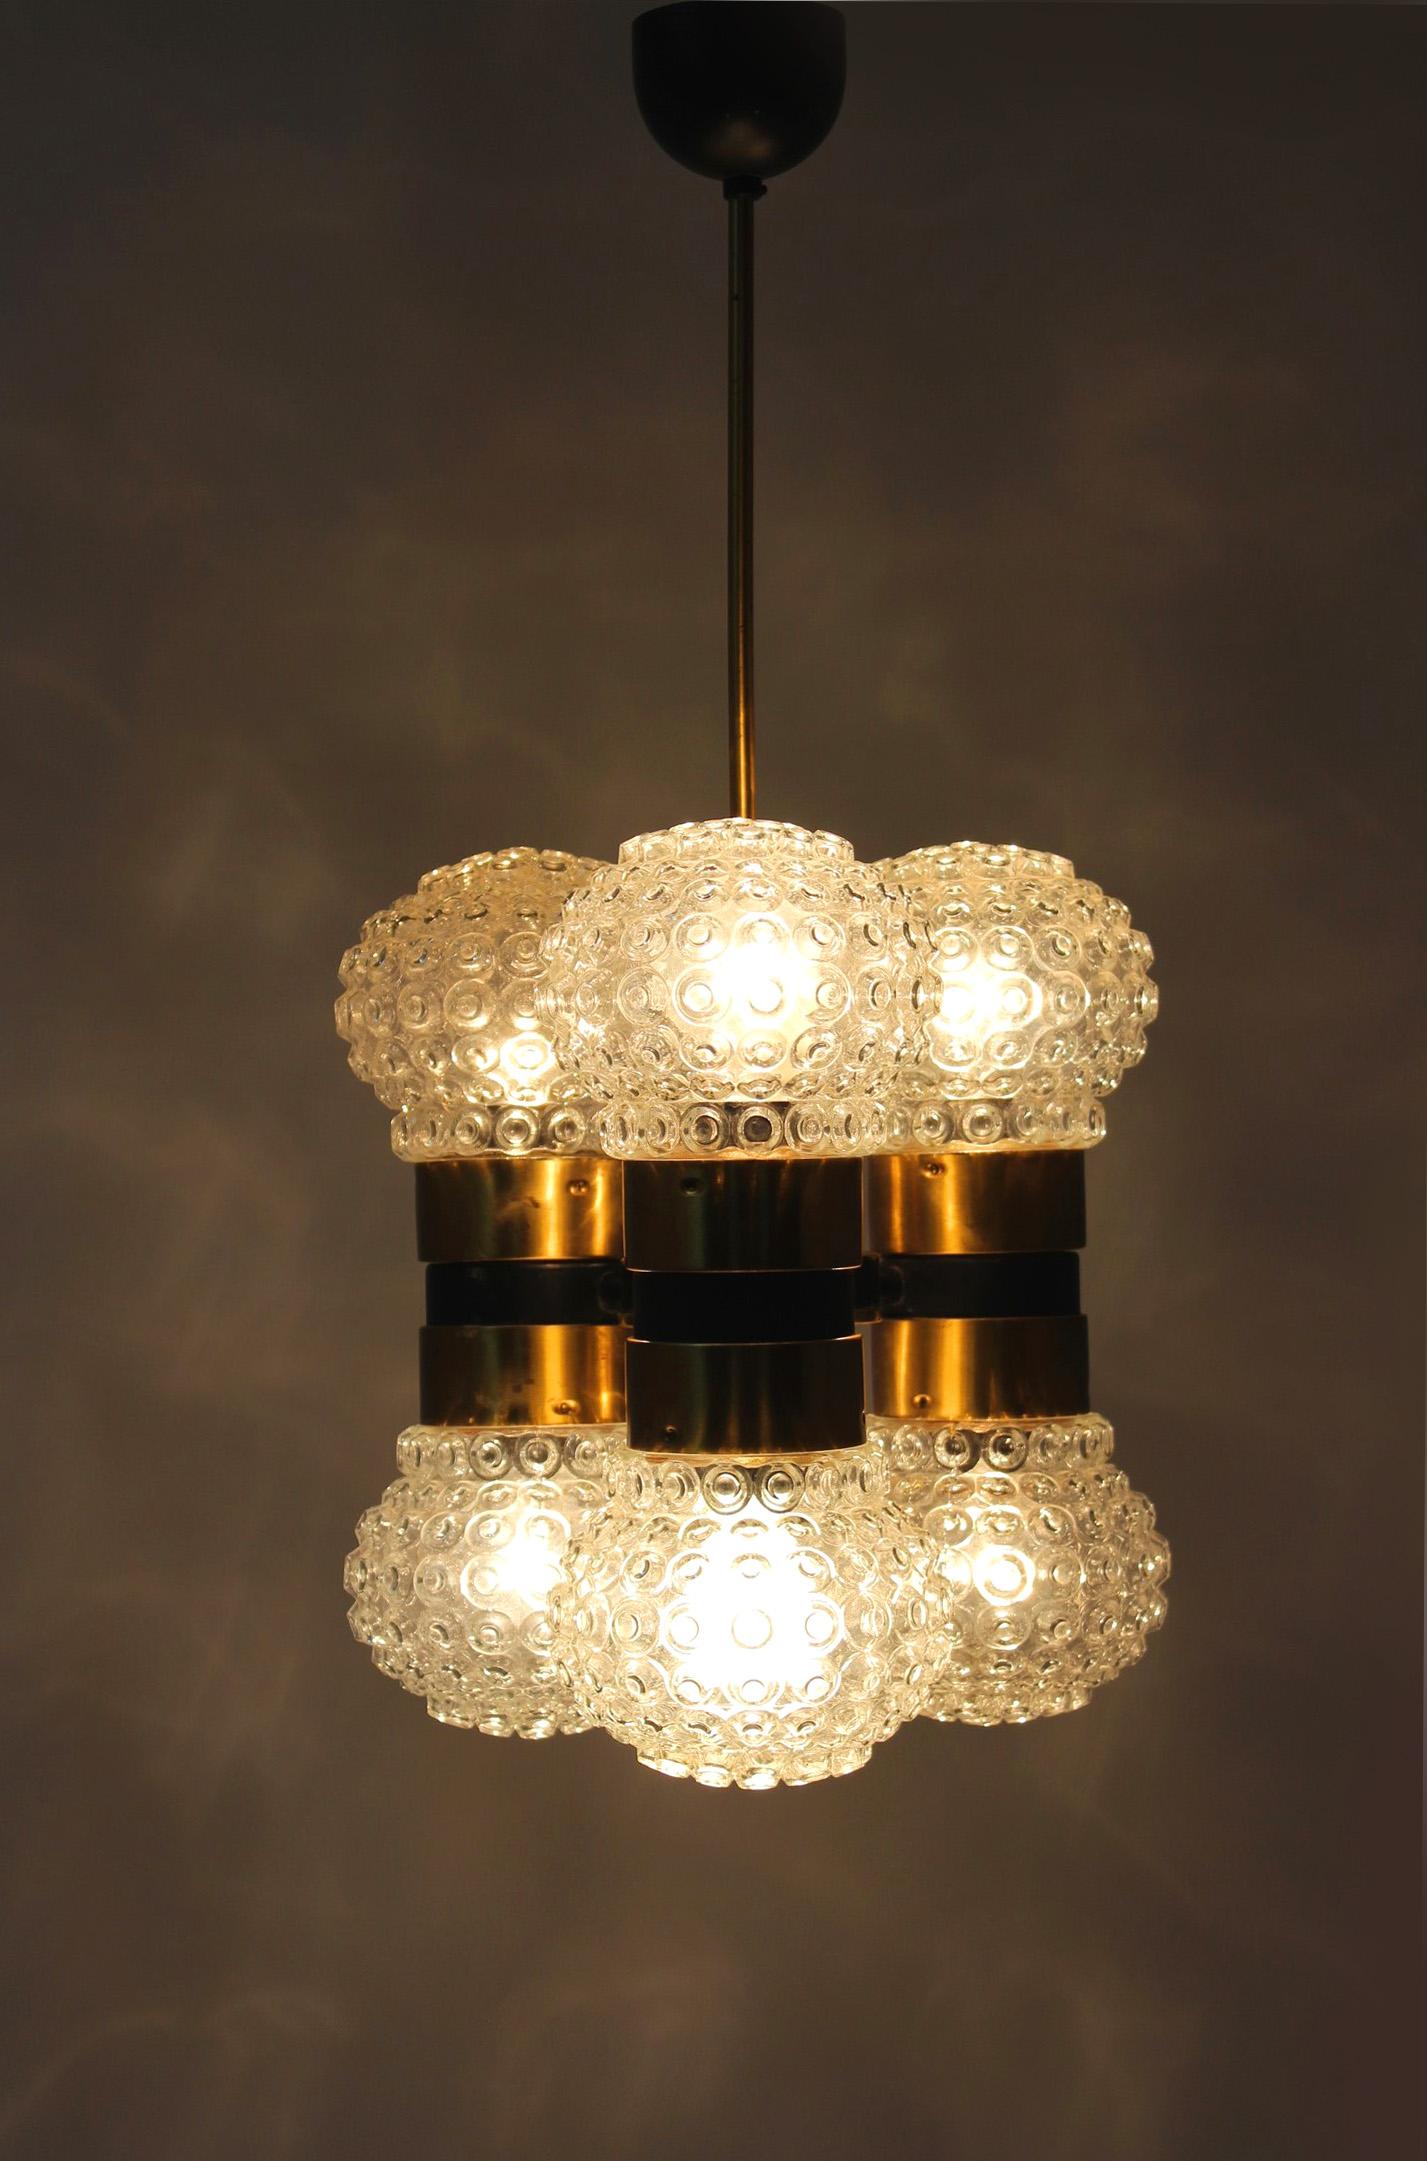 Czech Mid-Century Ceiling Lamp from Napako, 1970s For Sale